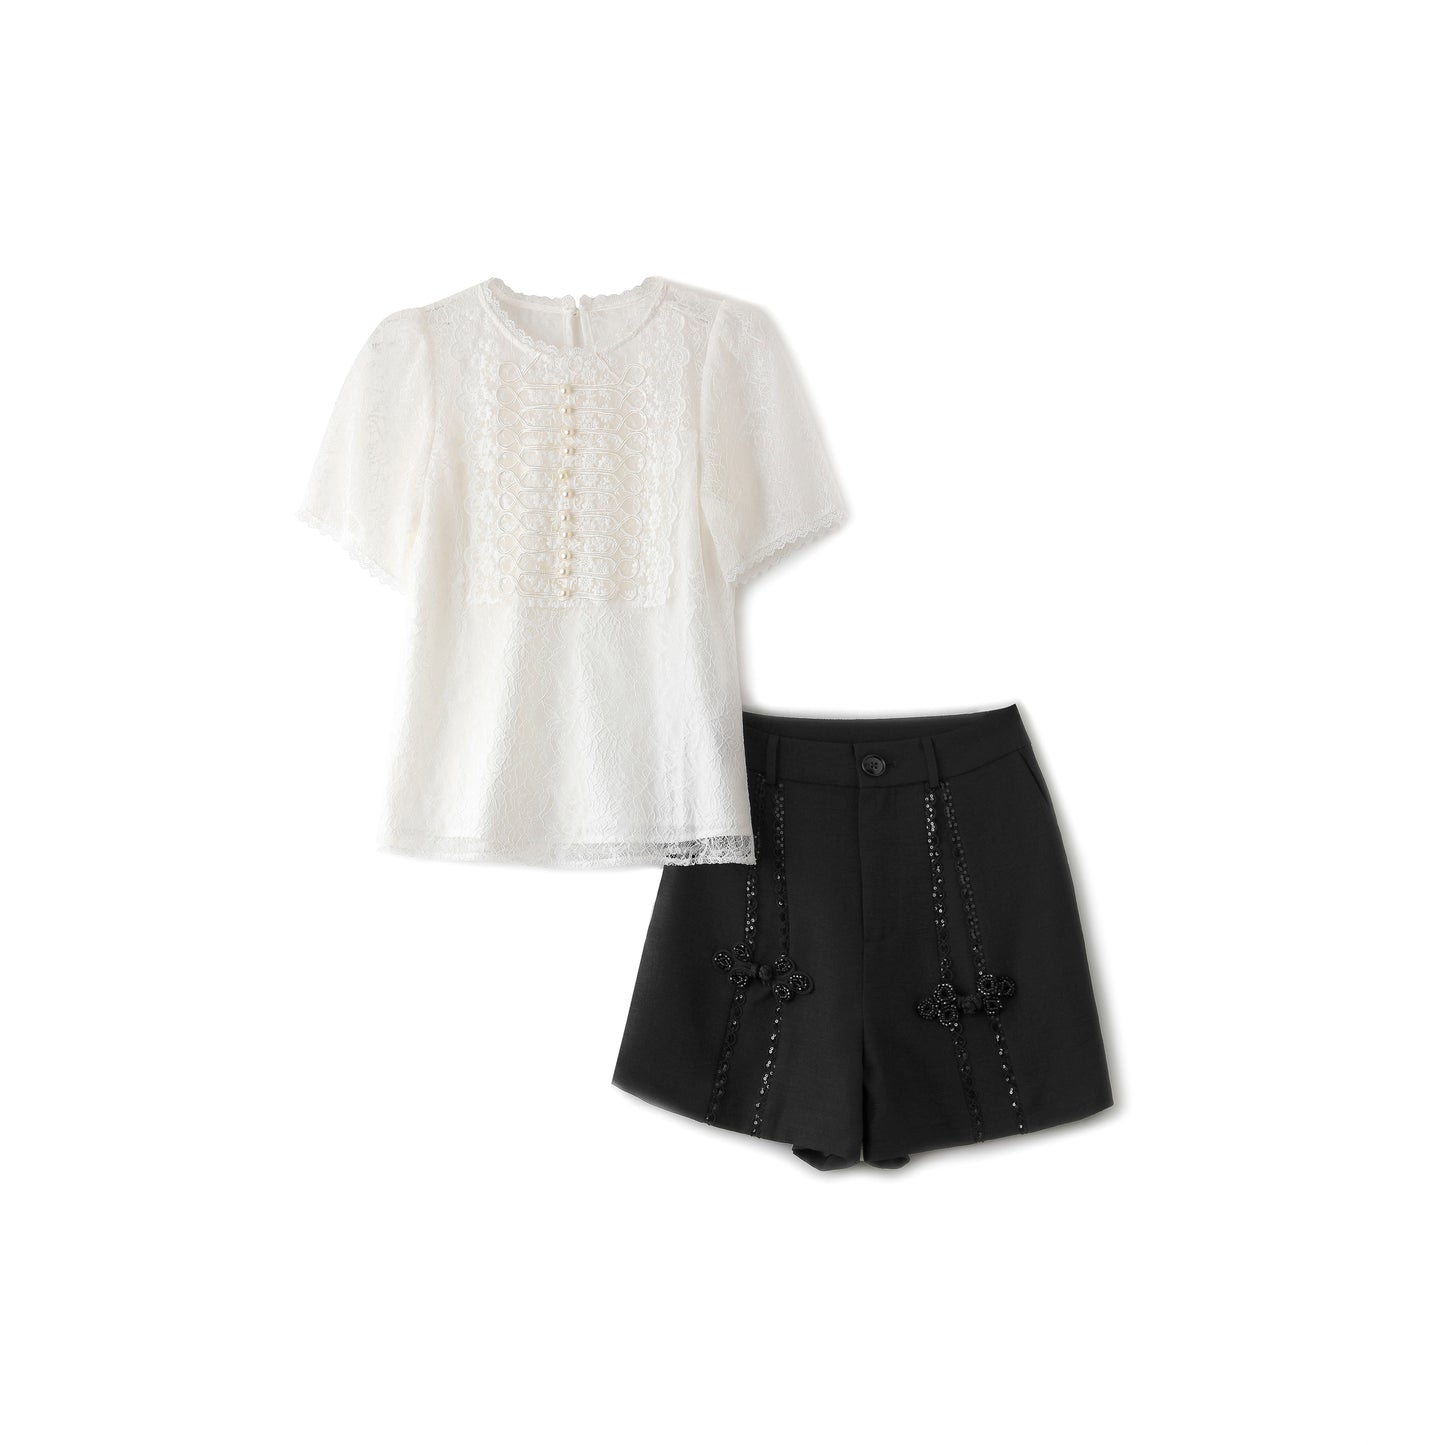 Malin lace top with shorts